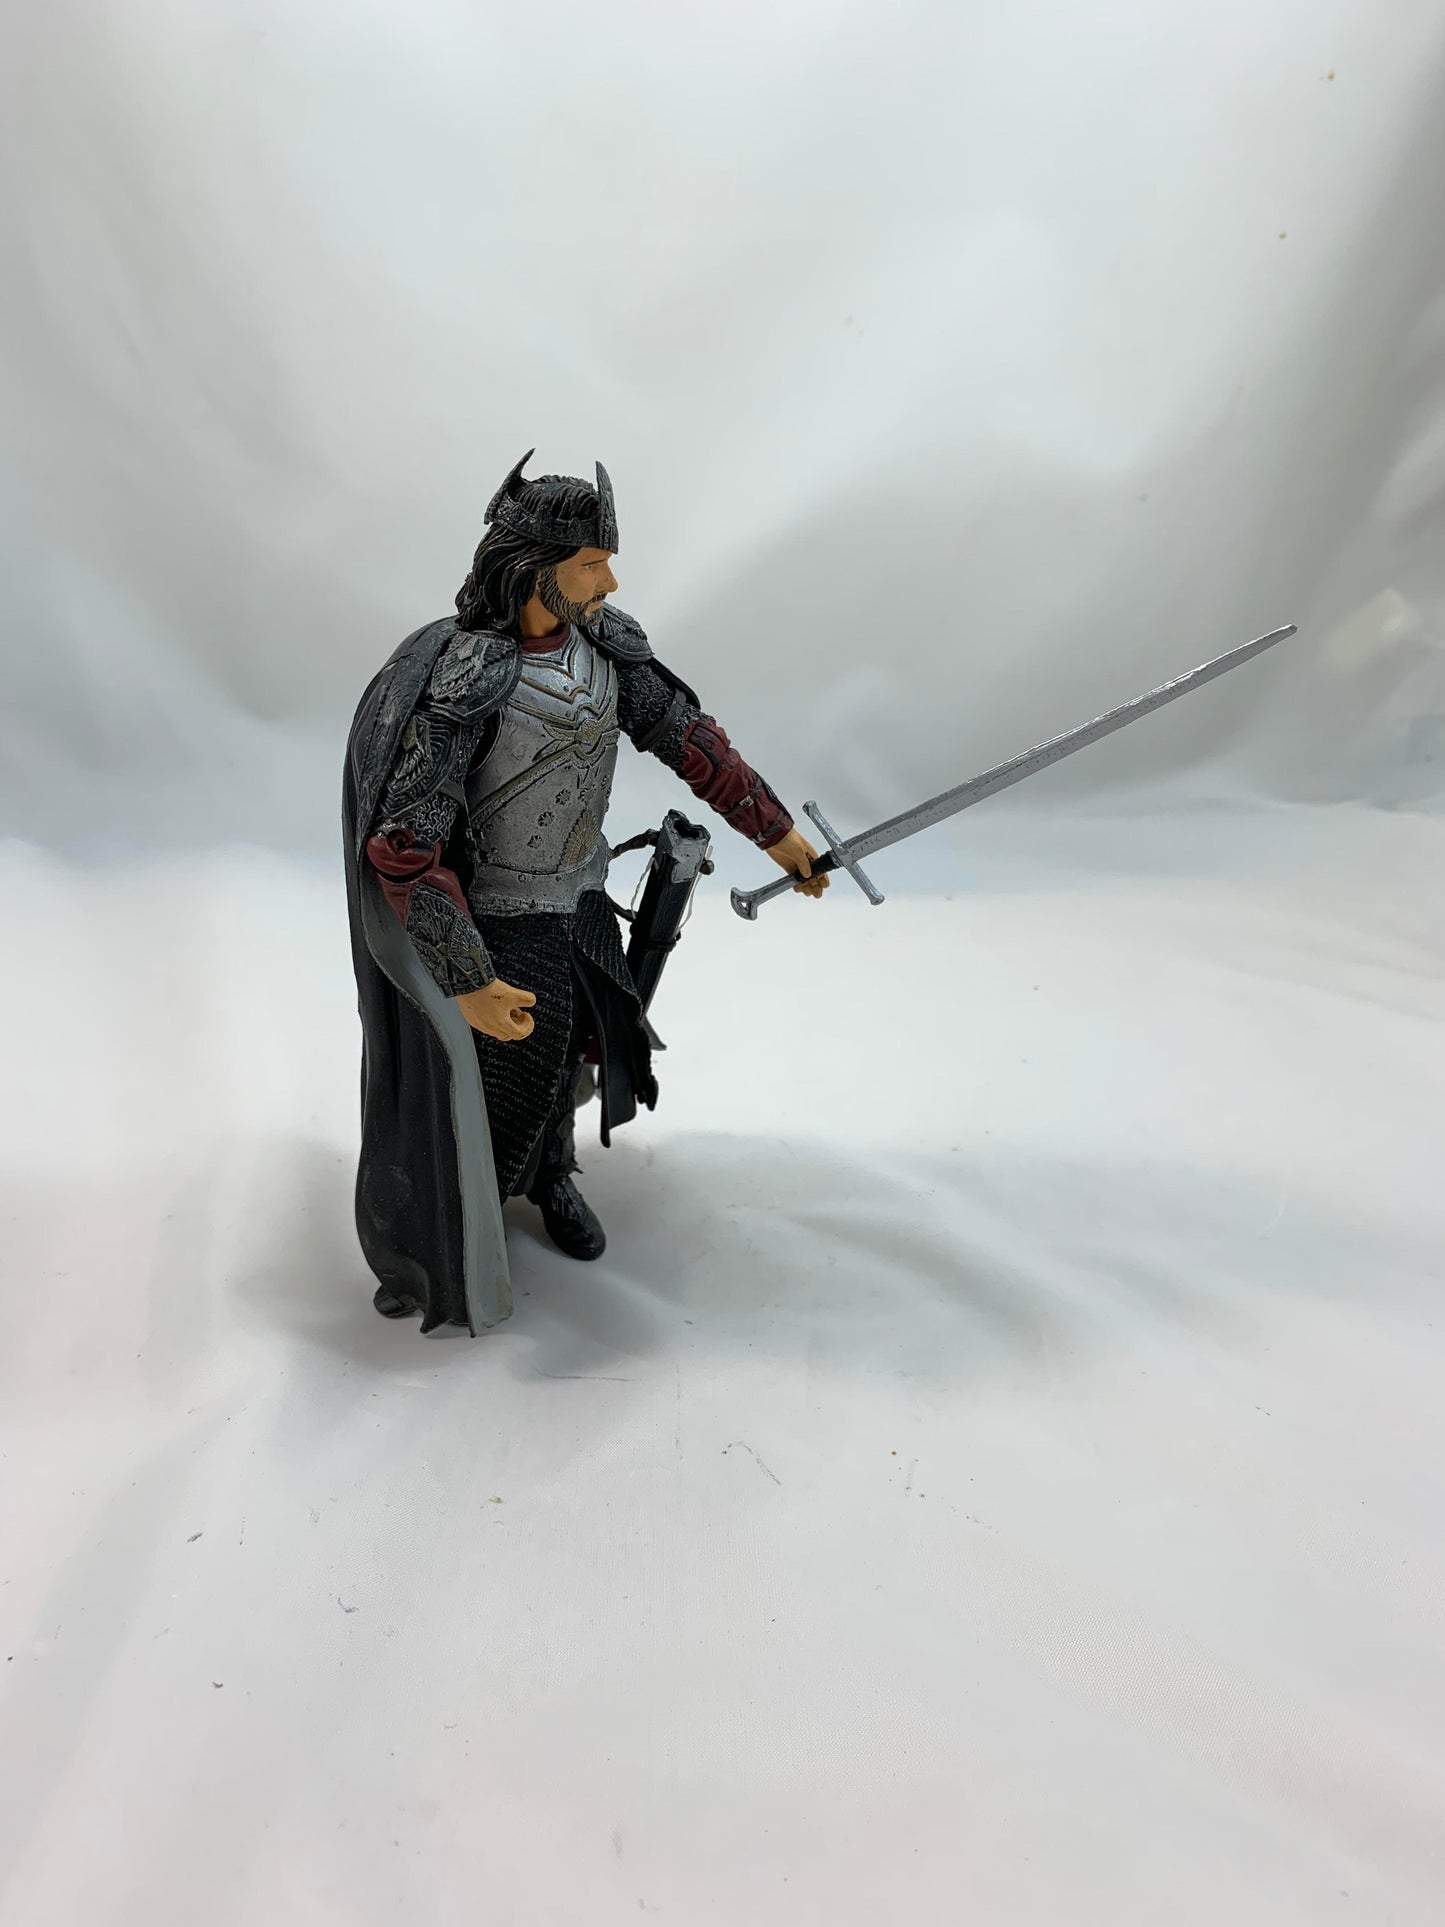 Toy Biz 2003 LORD OF THE RINGS MINT & LOOSE ACTION FIGURE - ARAGORN KING OF GONDOR - Loose